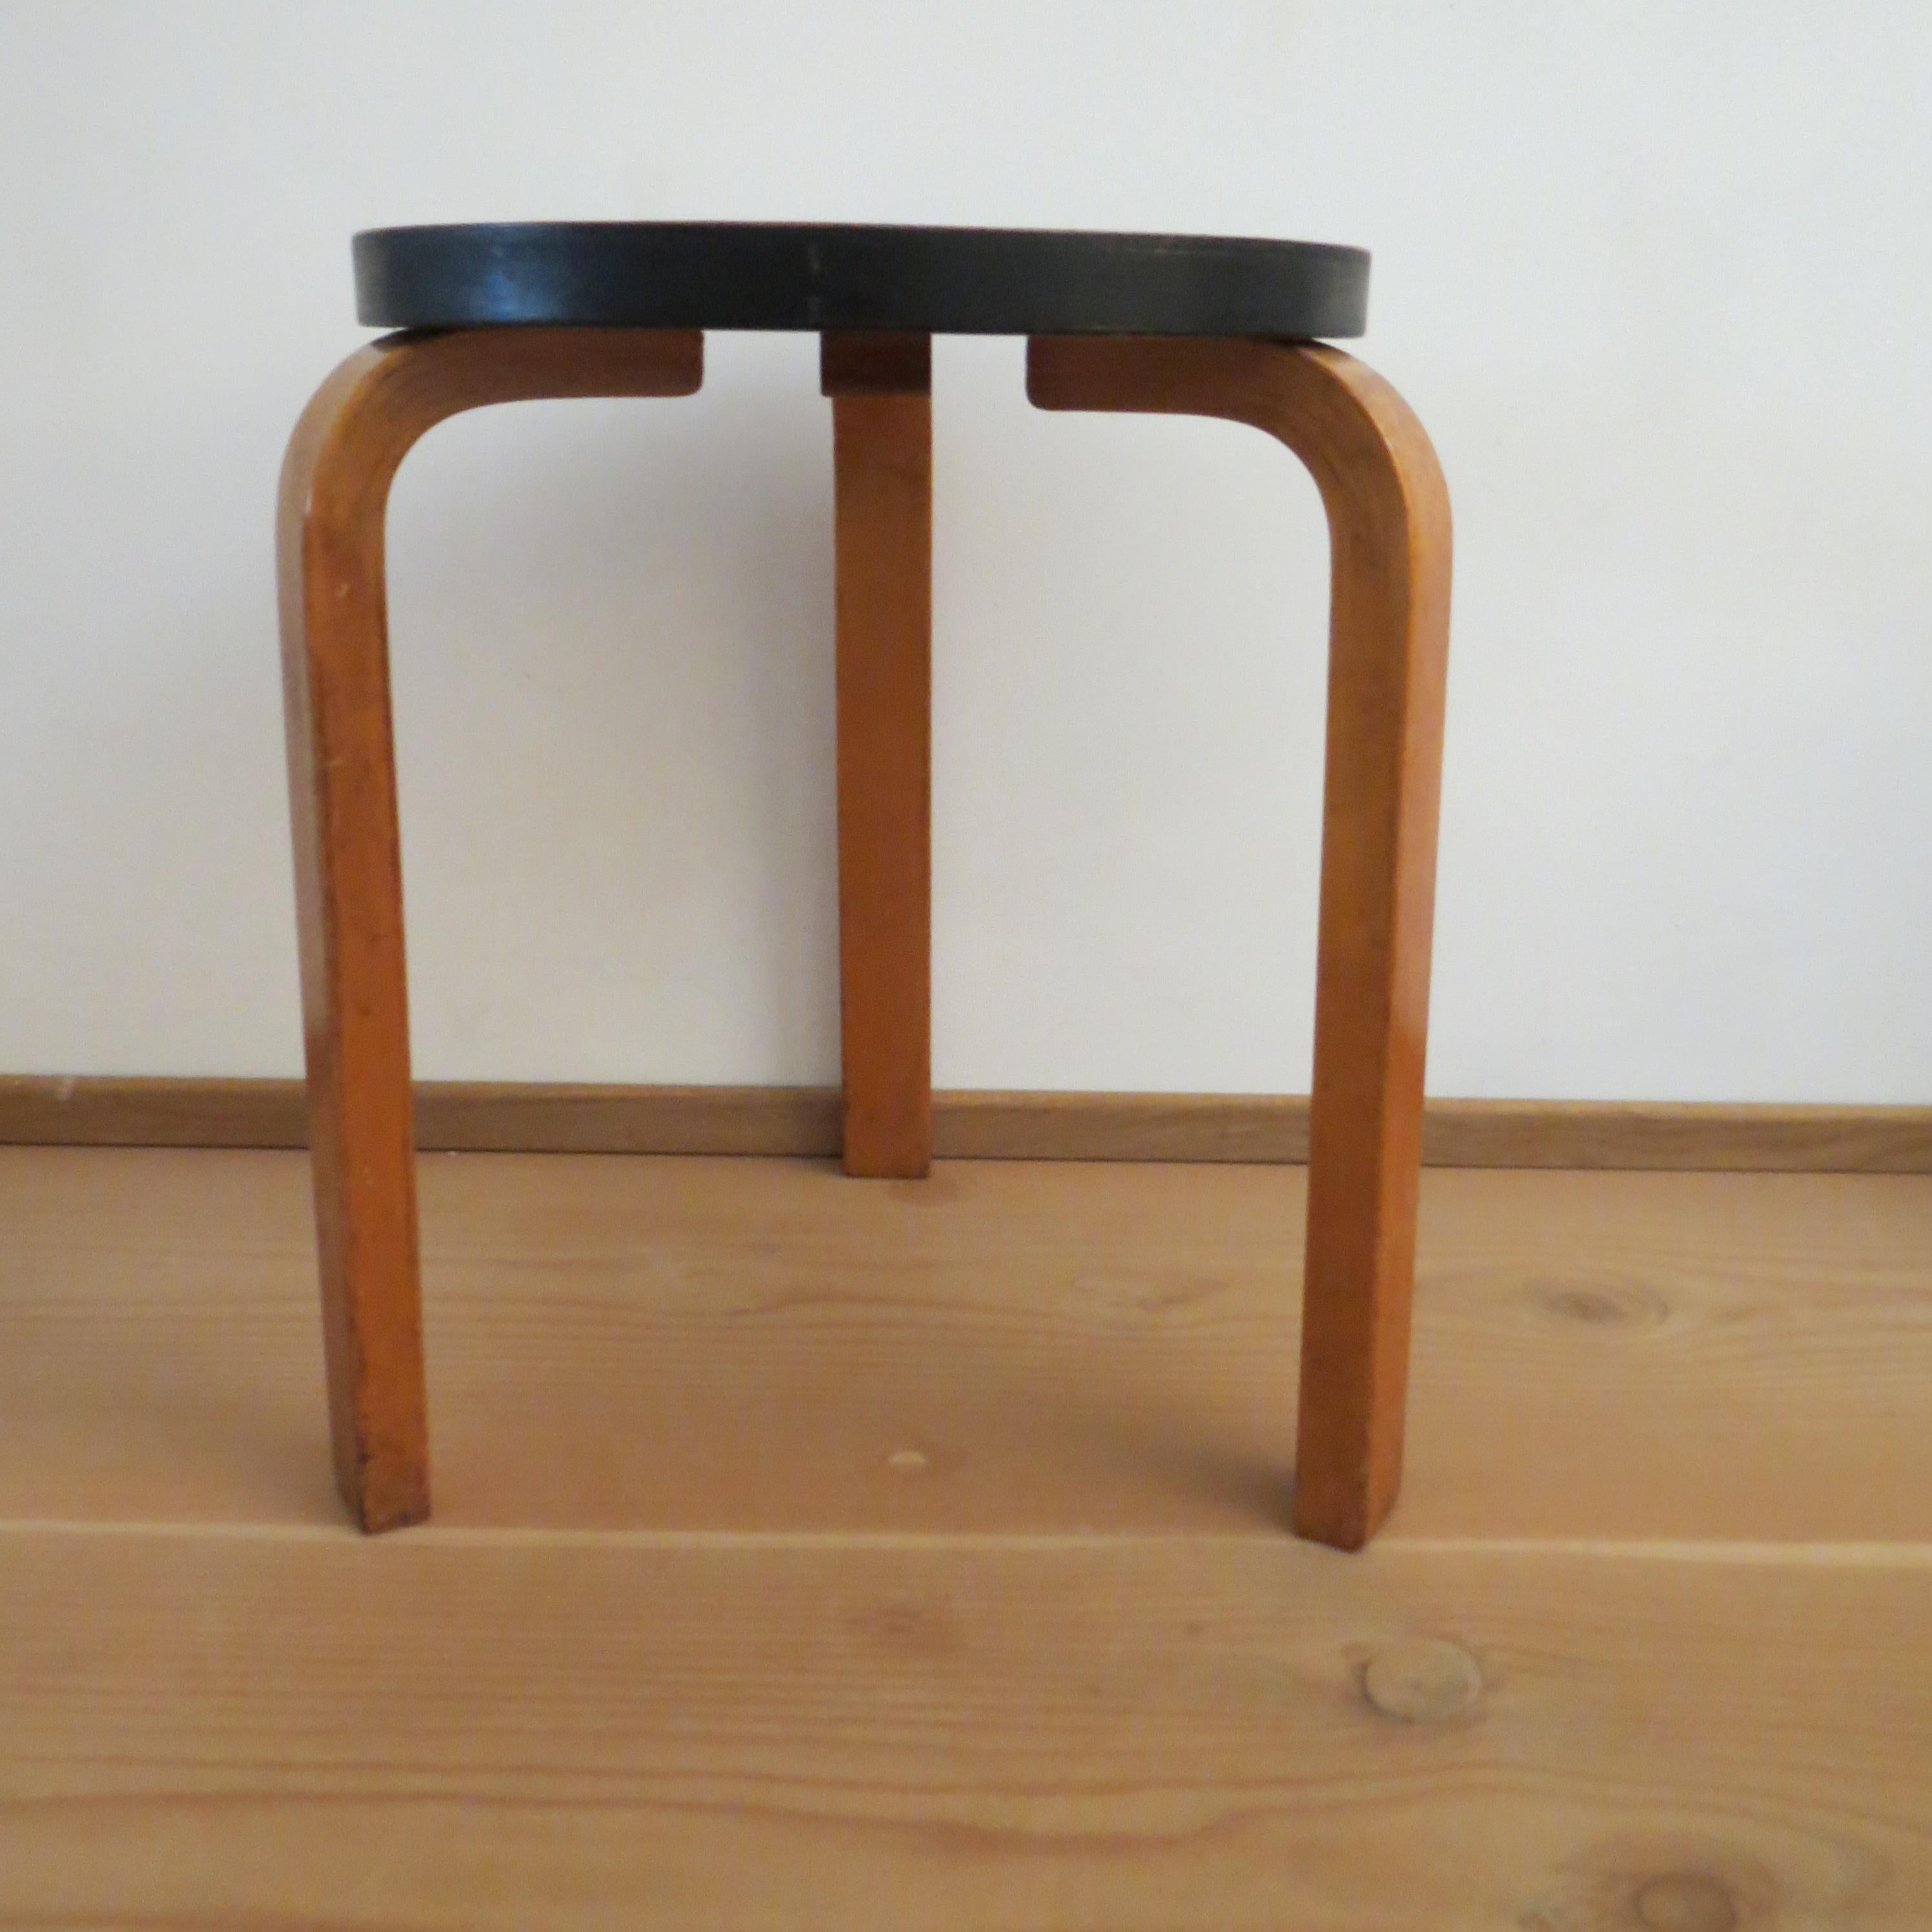 Wonderful, early stool designed by Alvar Aalto for Finmar, Finland. Originally designed 1933, this is an early edition, from the 1930s or 1940s.
Retains the original finish including ebonized edge to the seat of the stool which appears to be